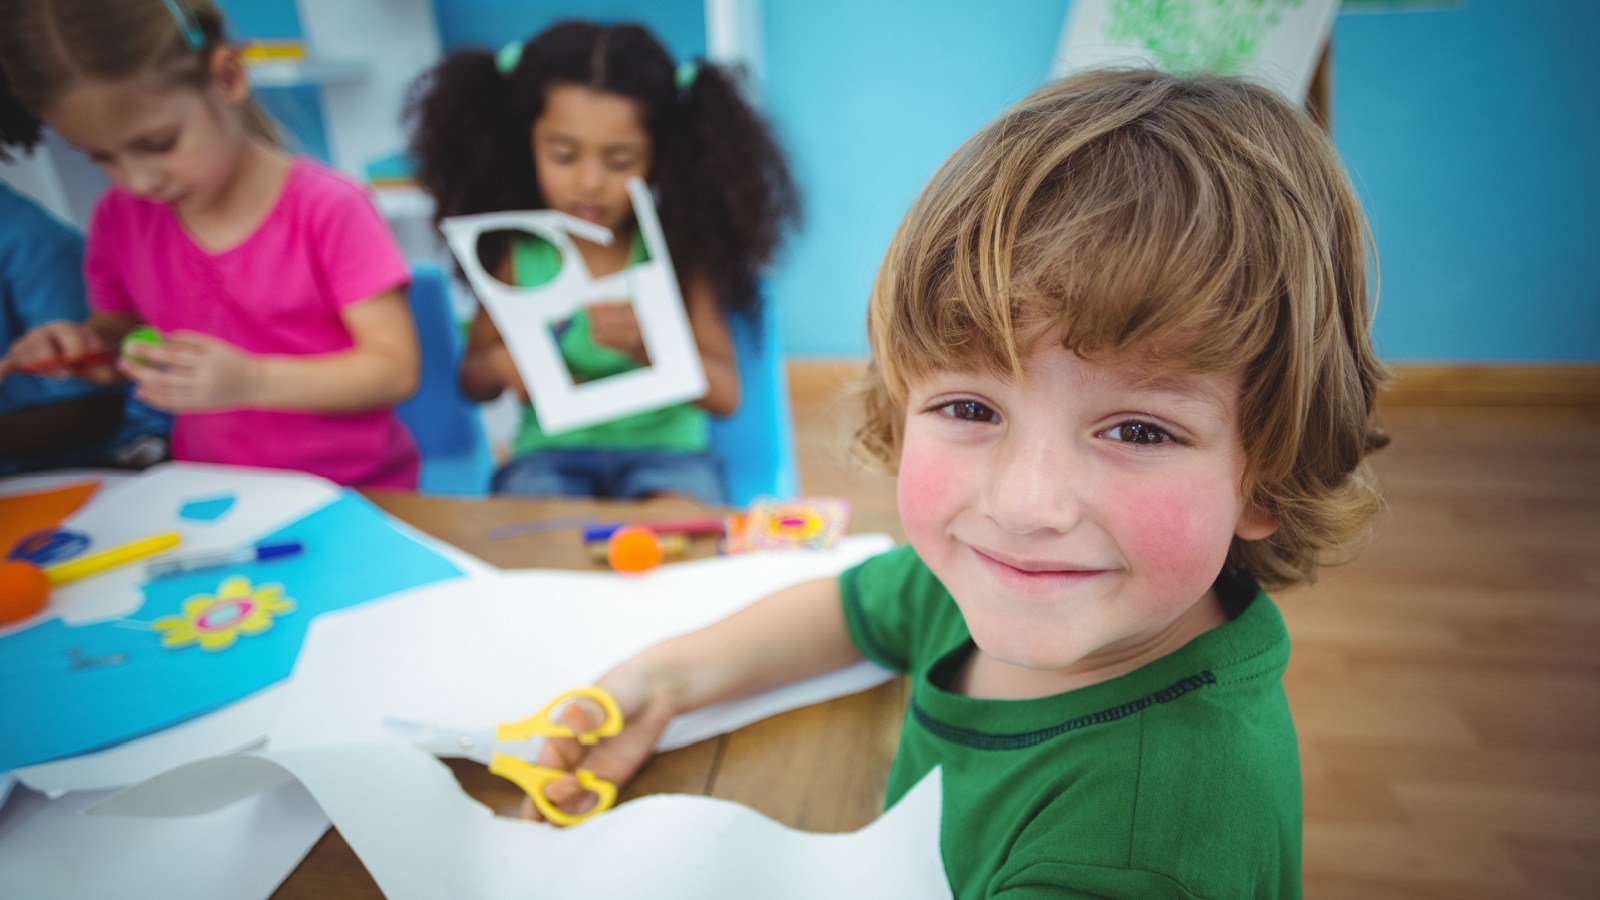 image credit: wavebreakmedia/shutterstock <p>Organize playdates with a creative twist. Have art supplies ready and a theme to spark their imagination. These sessions can be a joyful, shared artistic journey. It’s beautiful to see how different children interpret the same theme.</p>